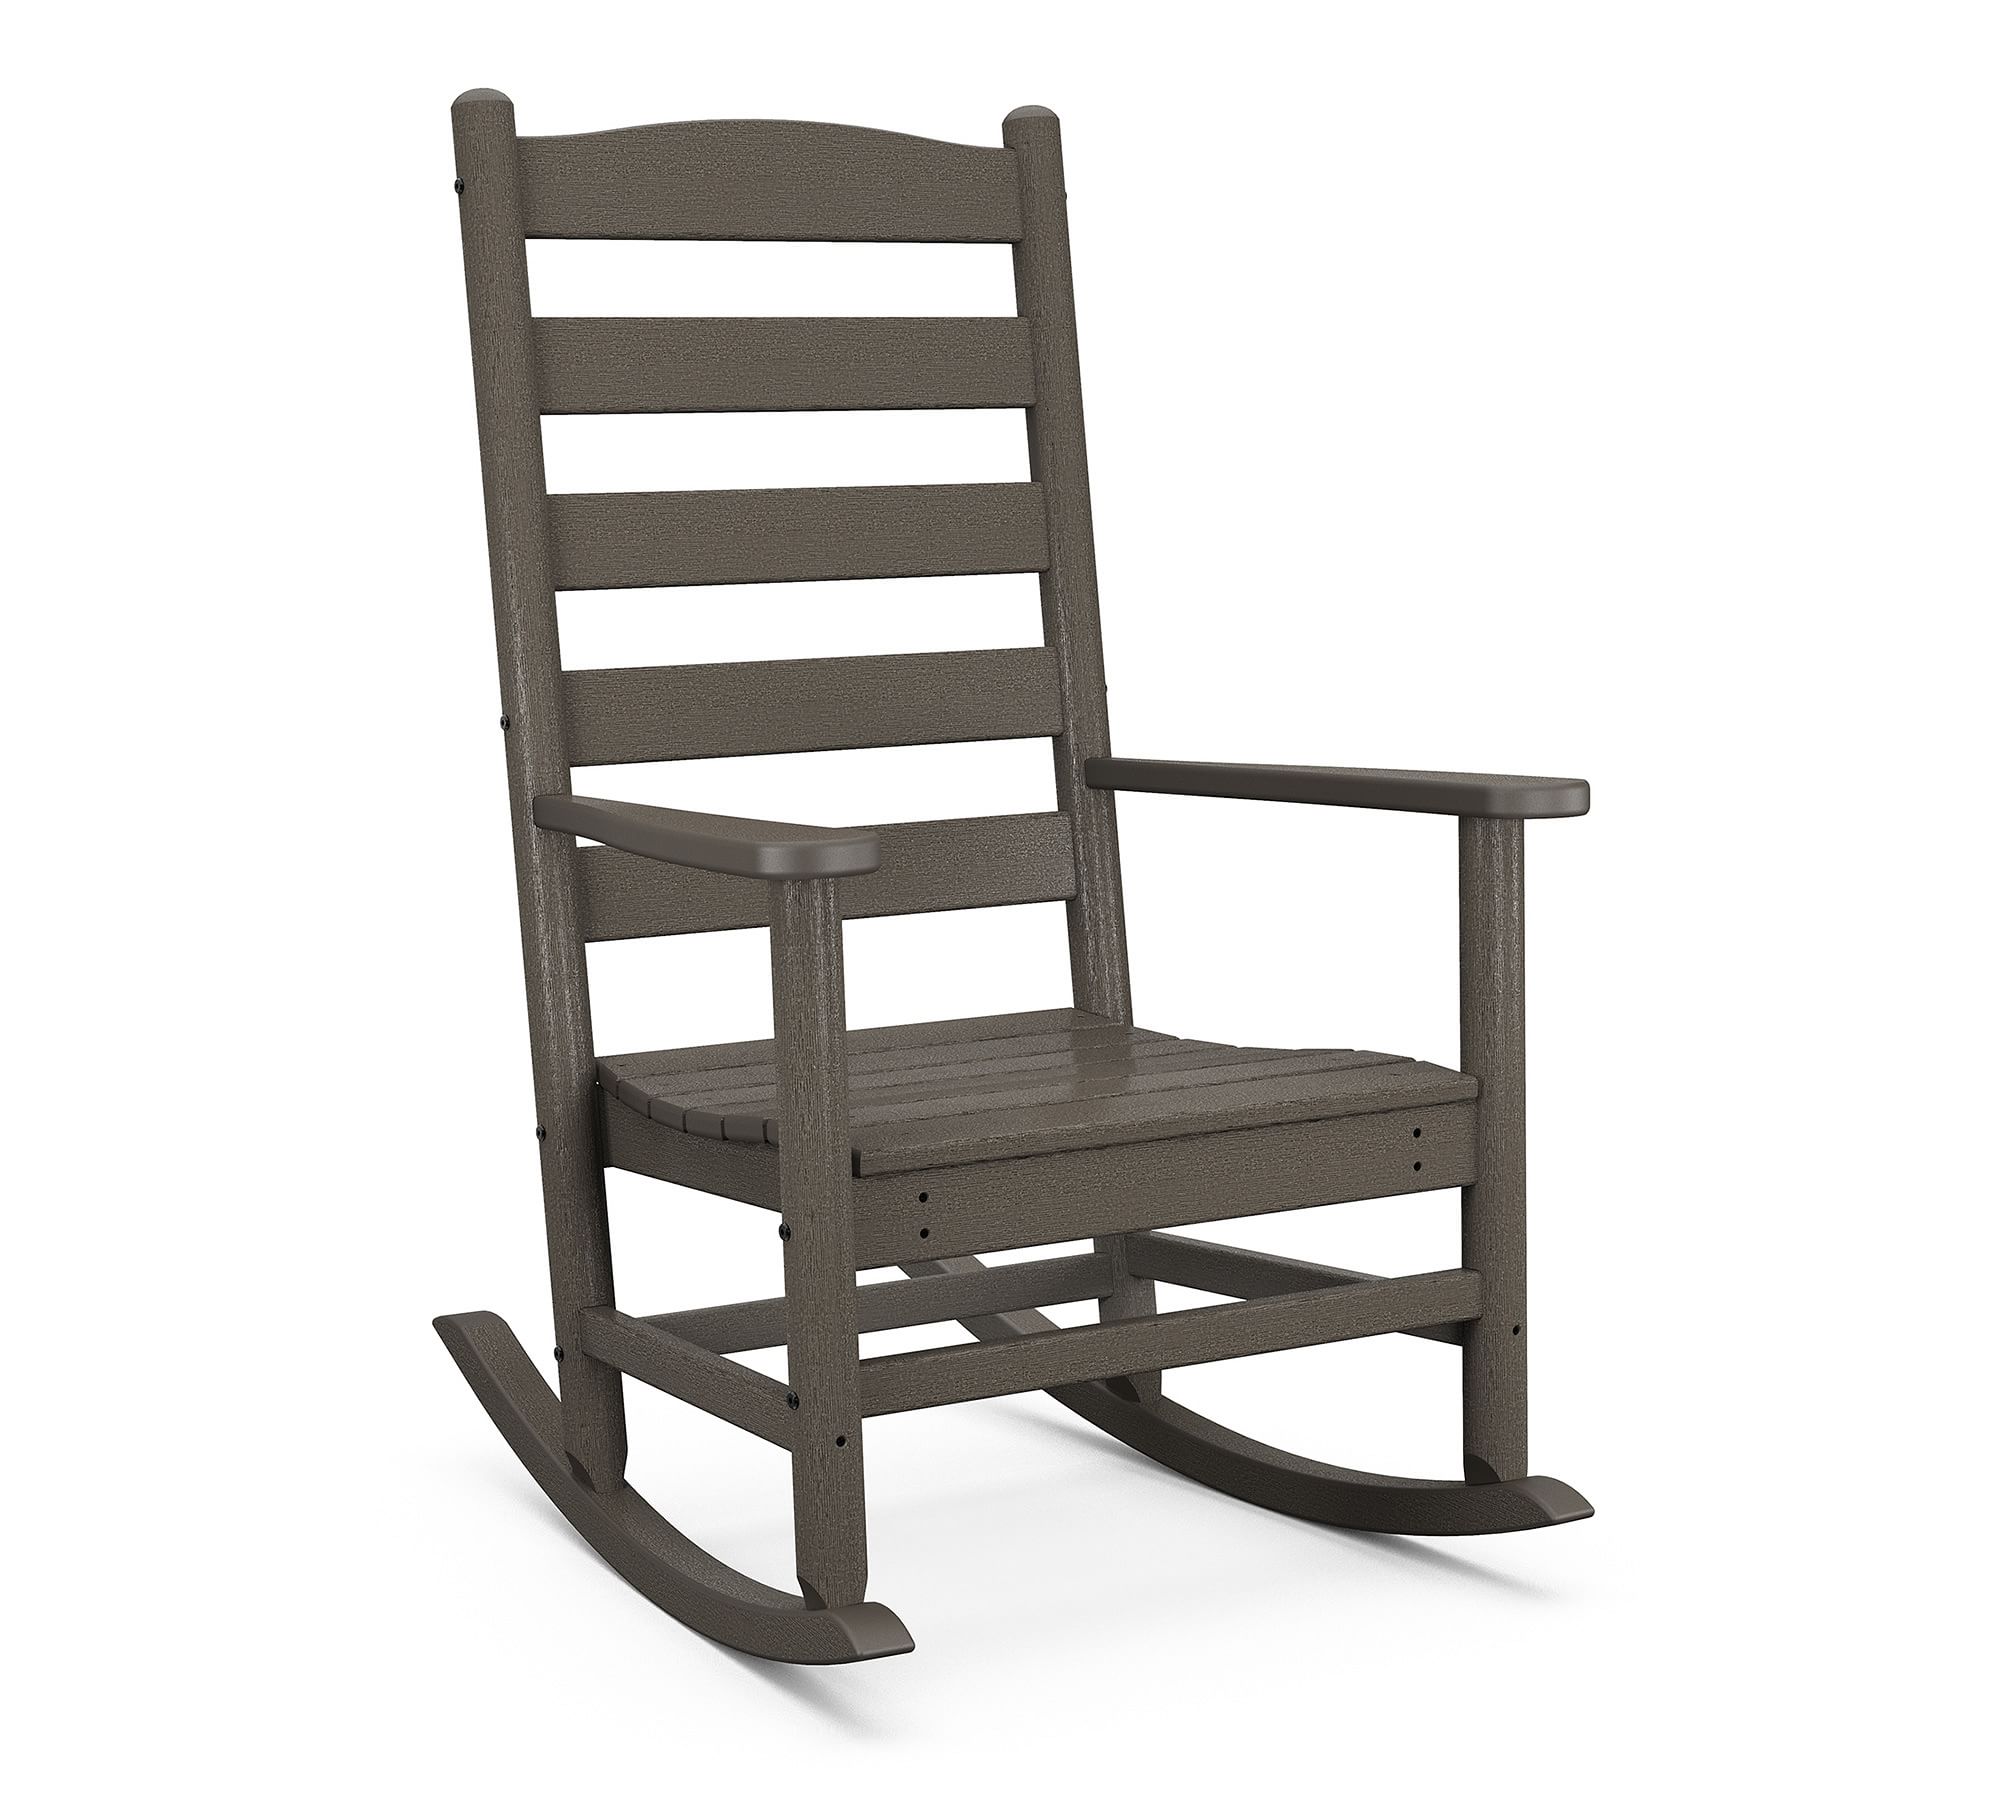 Polywood Ladderback Outdoor Rocking Chair